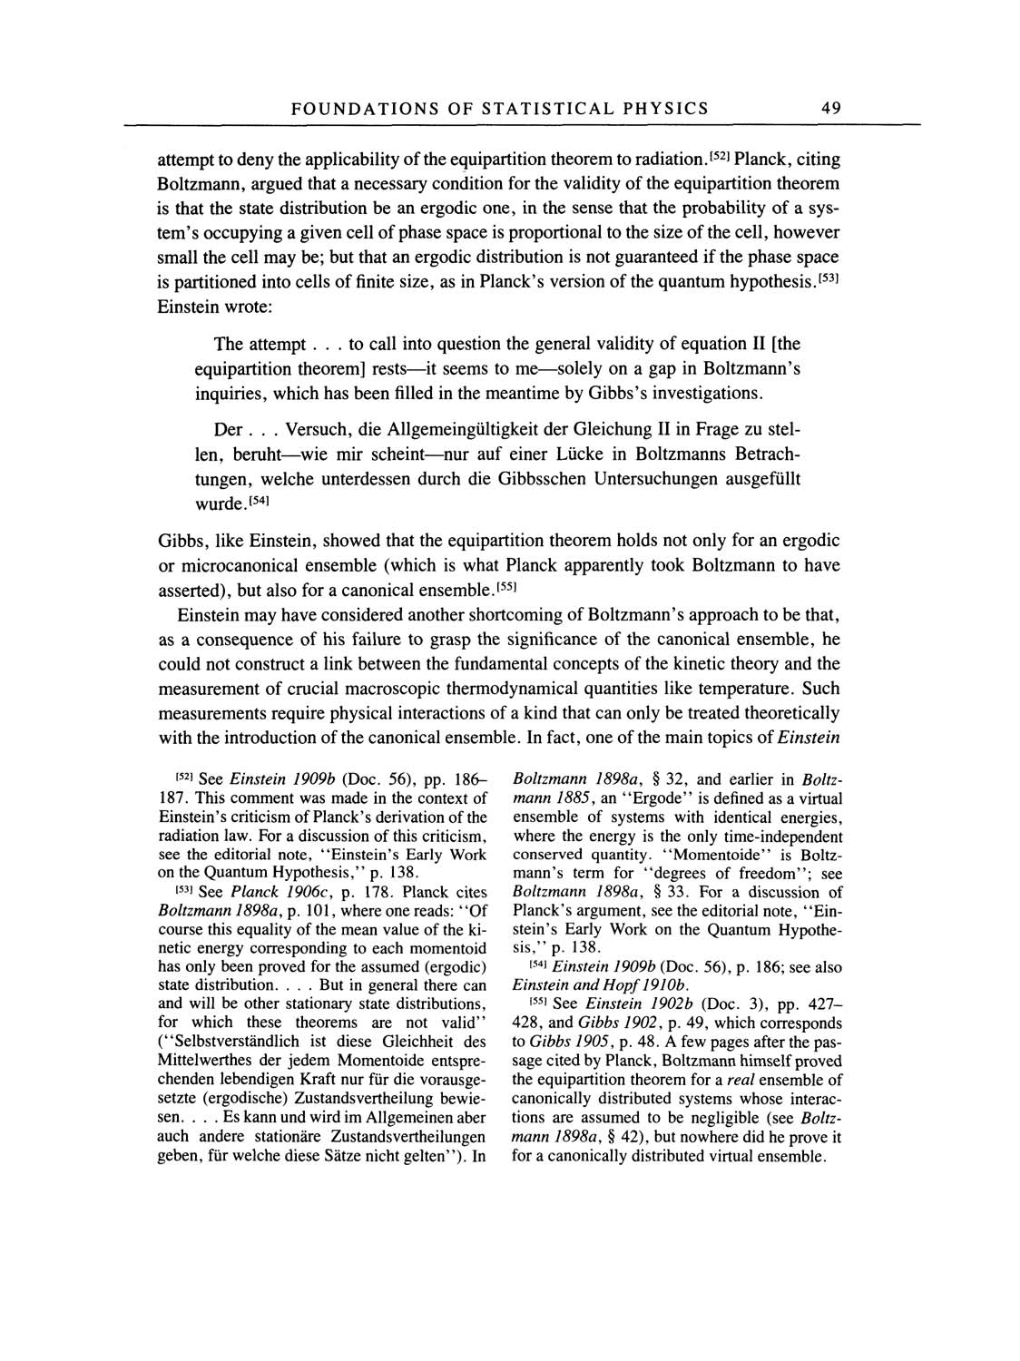 Volume 2: The Swiss Years: Writings, 1900-1909 page 49